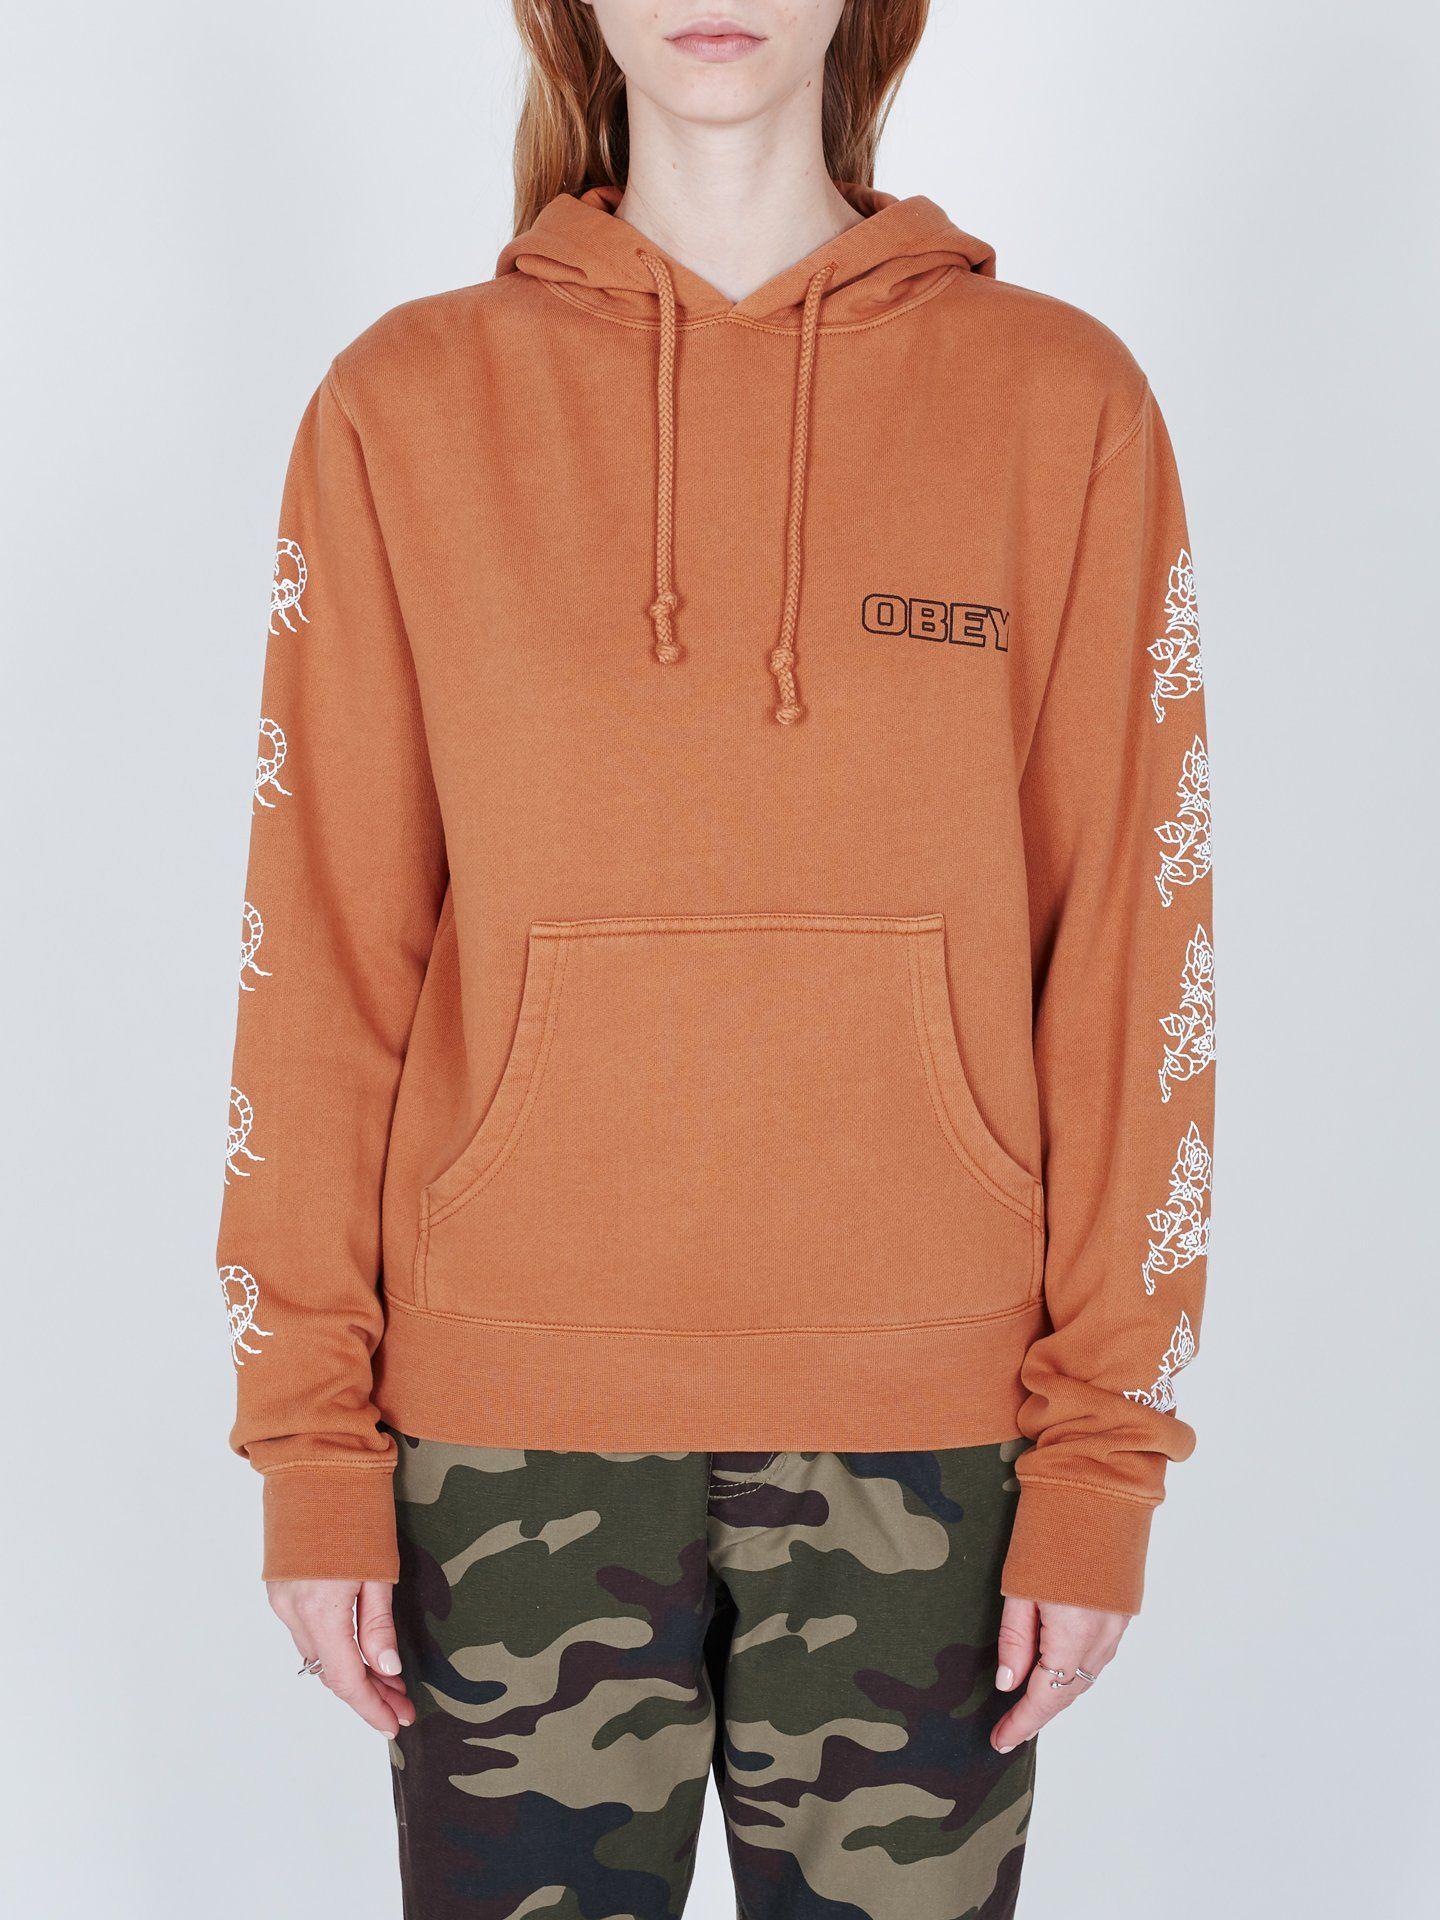 OBEY Clothing Rose Logo - Scorpion Rose Box Pigment Pullover | OBEY Clothing | online shopping ...